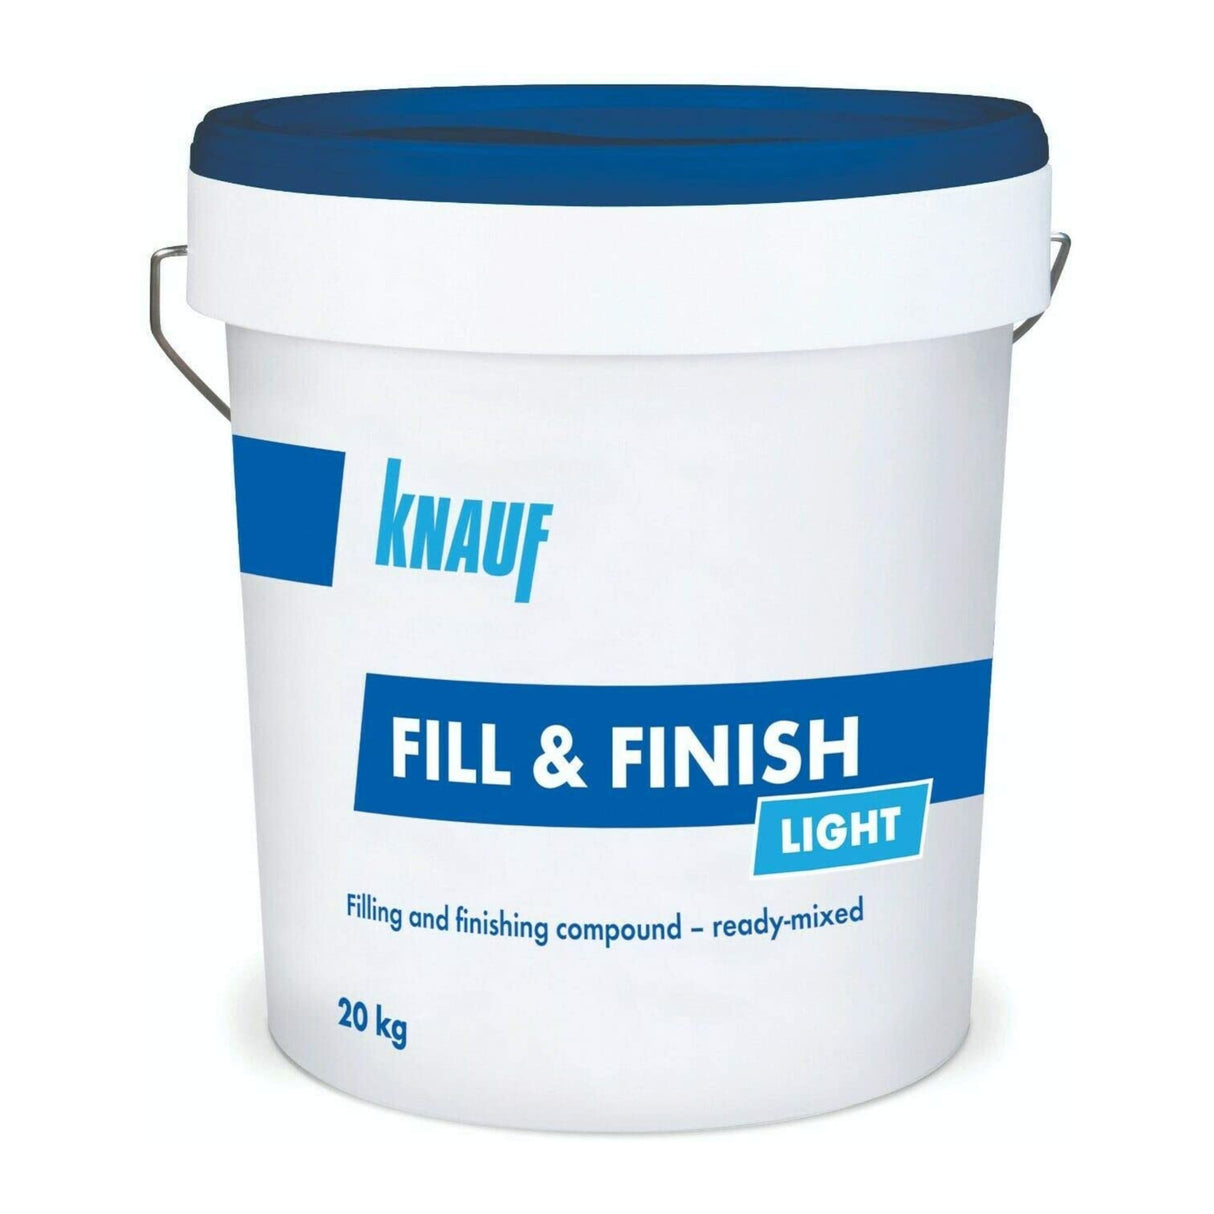 Knauf Fill and Finish Light Ready Mixed Compound - 20Kg (6702728806579)